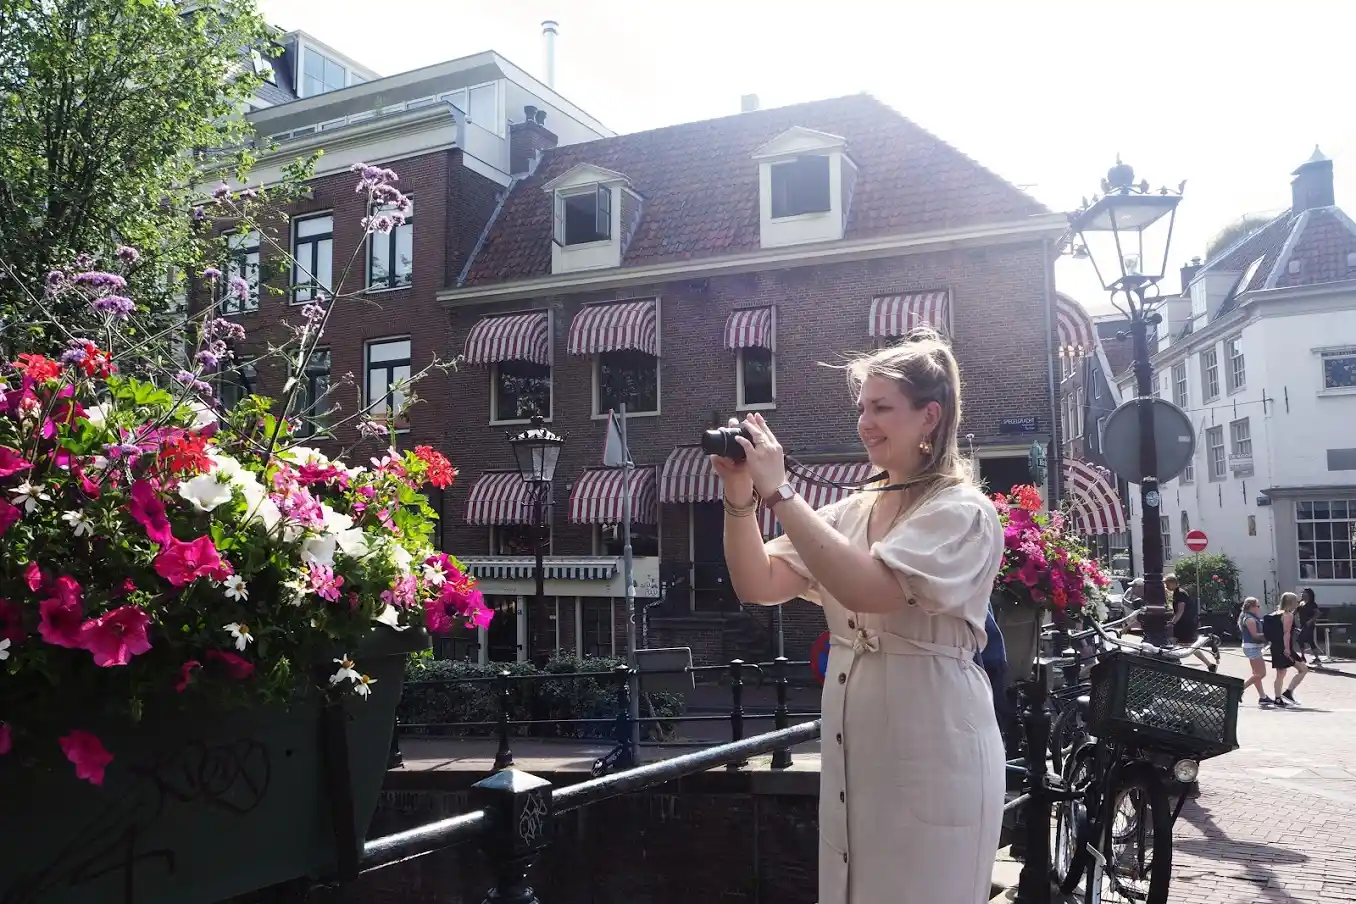 Tea taking pictures at the Amsterdam canals